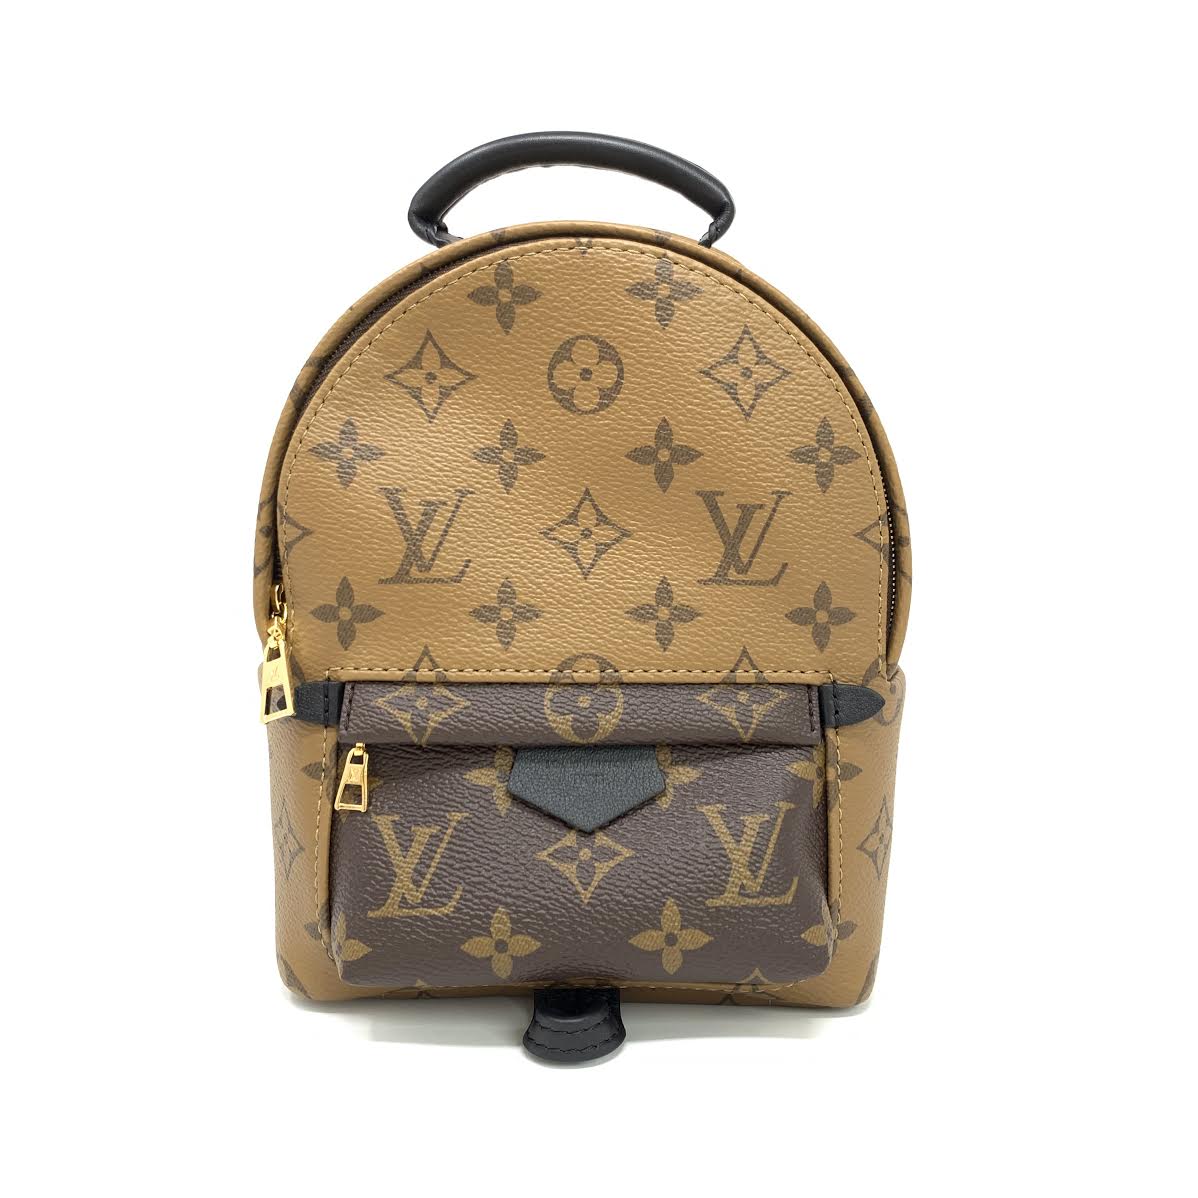 Bag Review: Louis Vuitton Palm Springs Backpack Mini